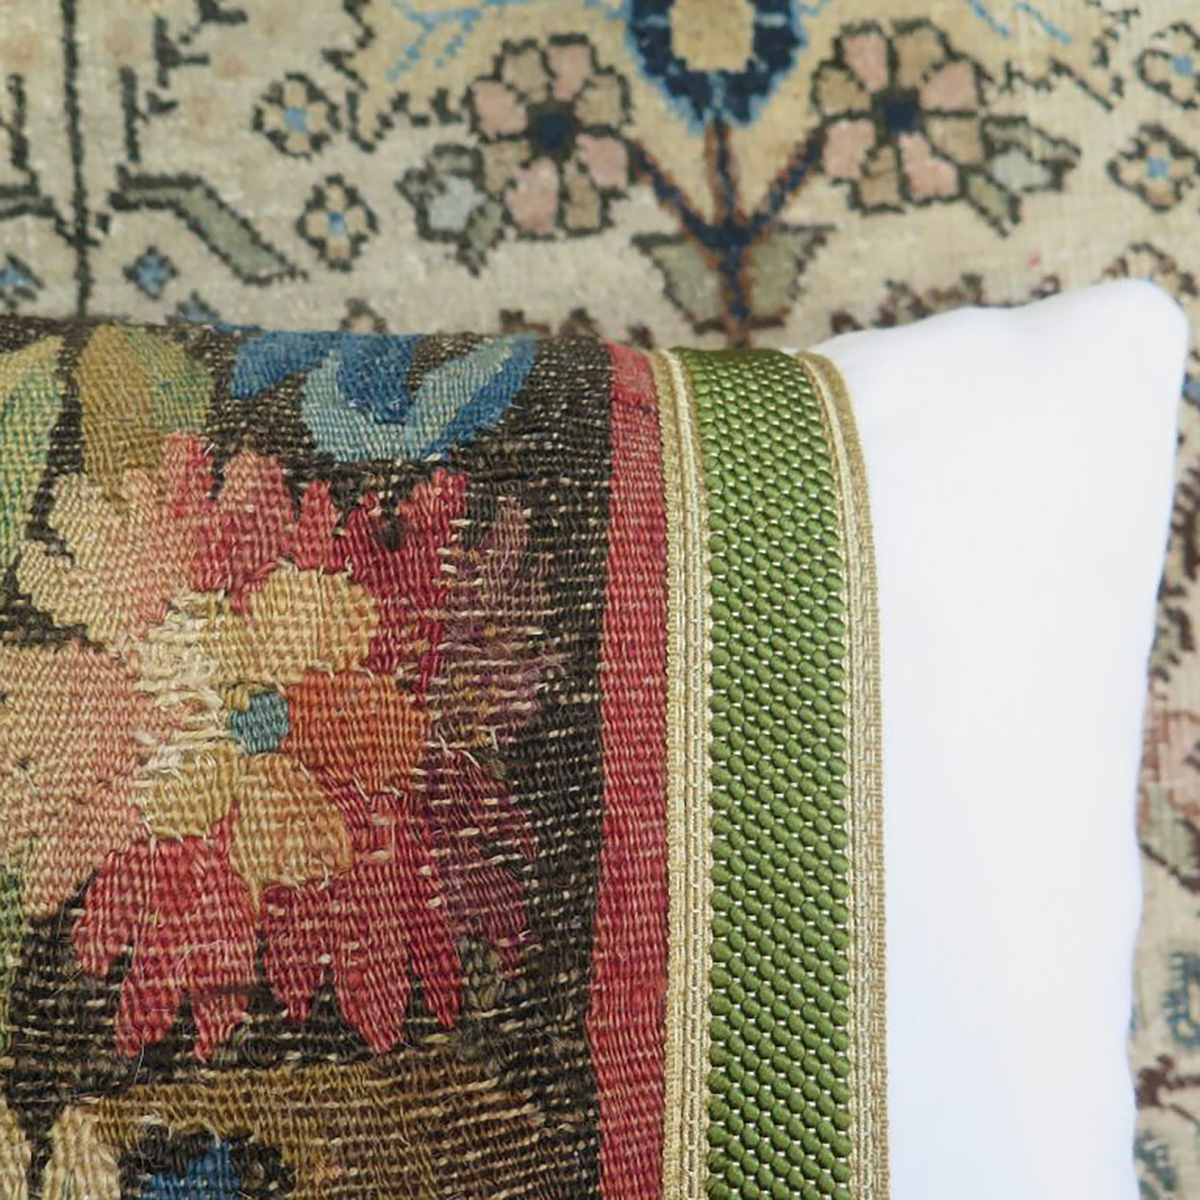 18th Century Floral Tapestry Pillow